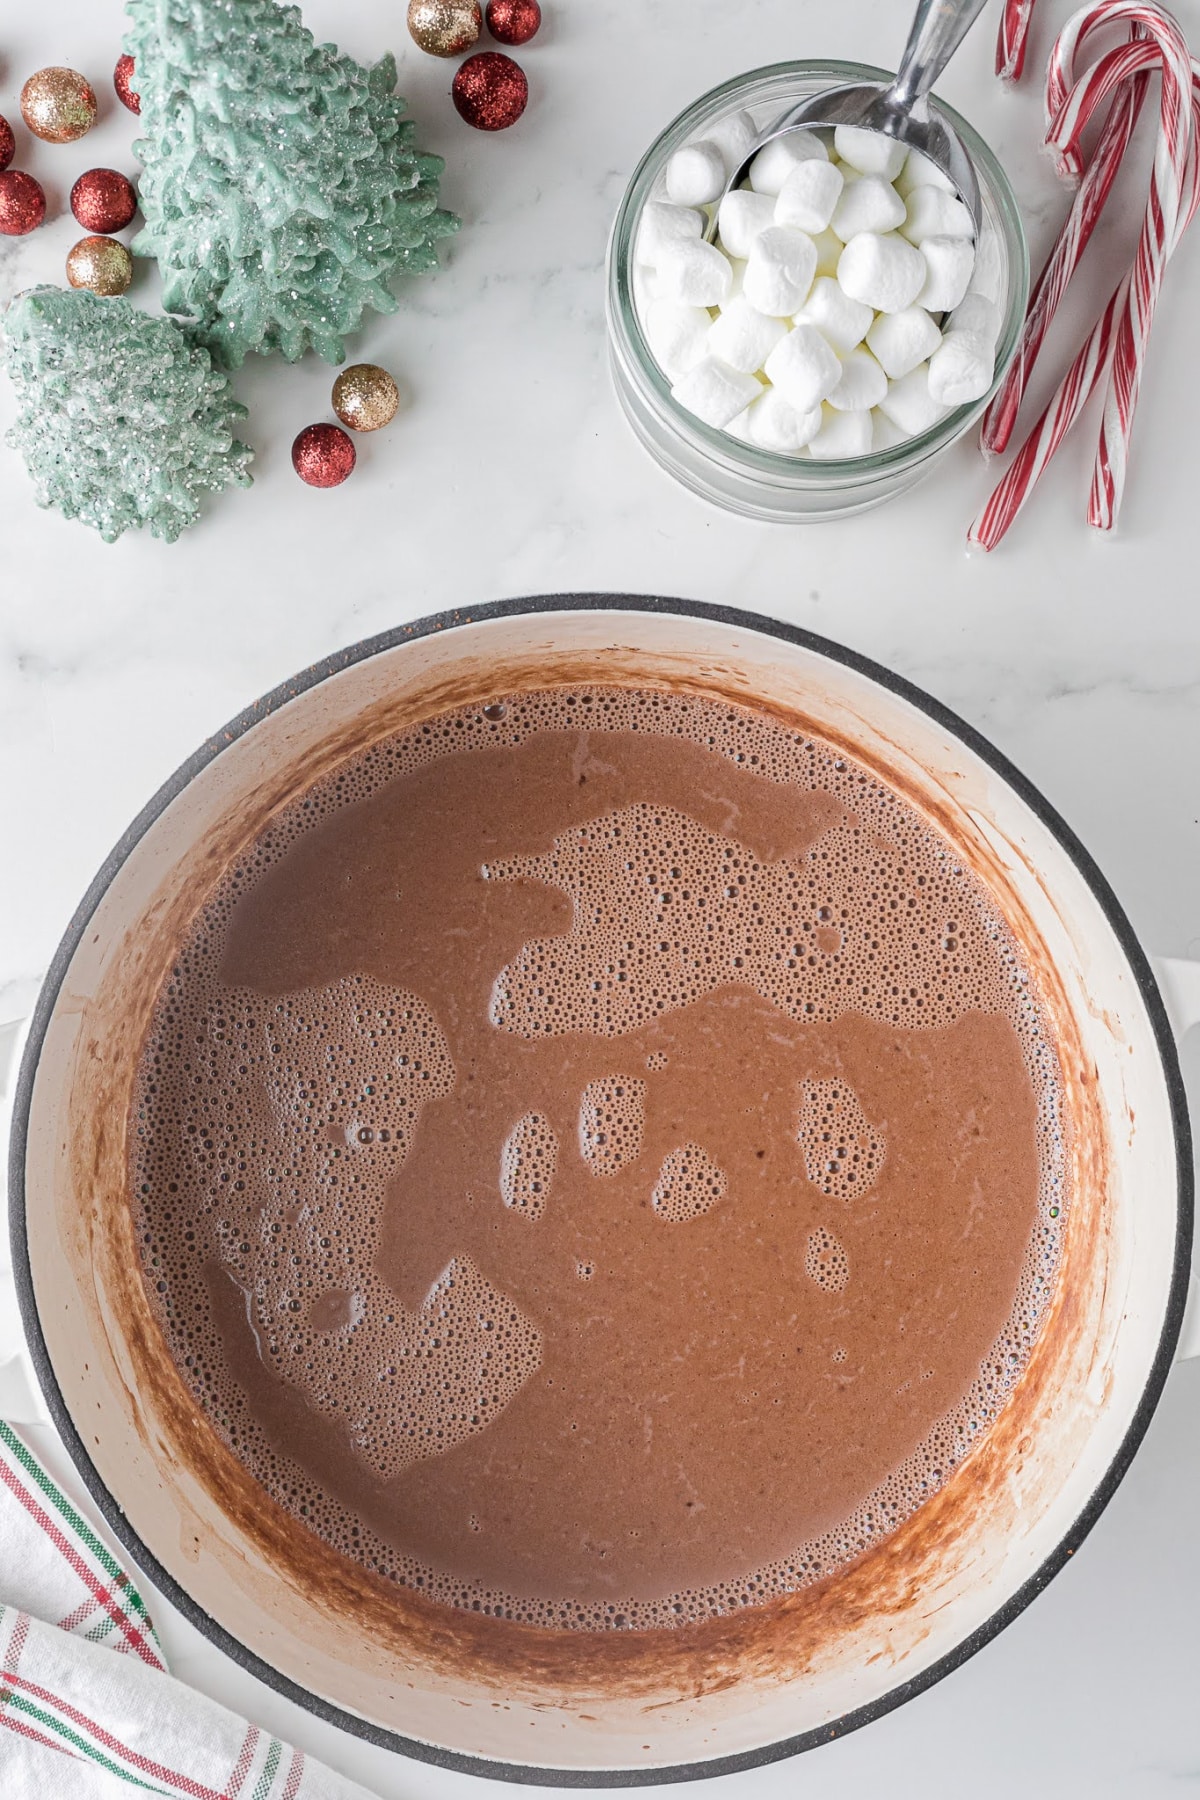 large saucepan full of hot chocolate on a white countertop with a cup full of marshmallows and holiday decor 